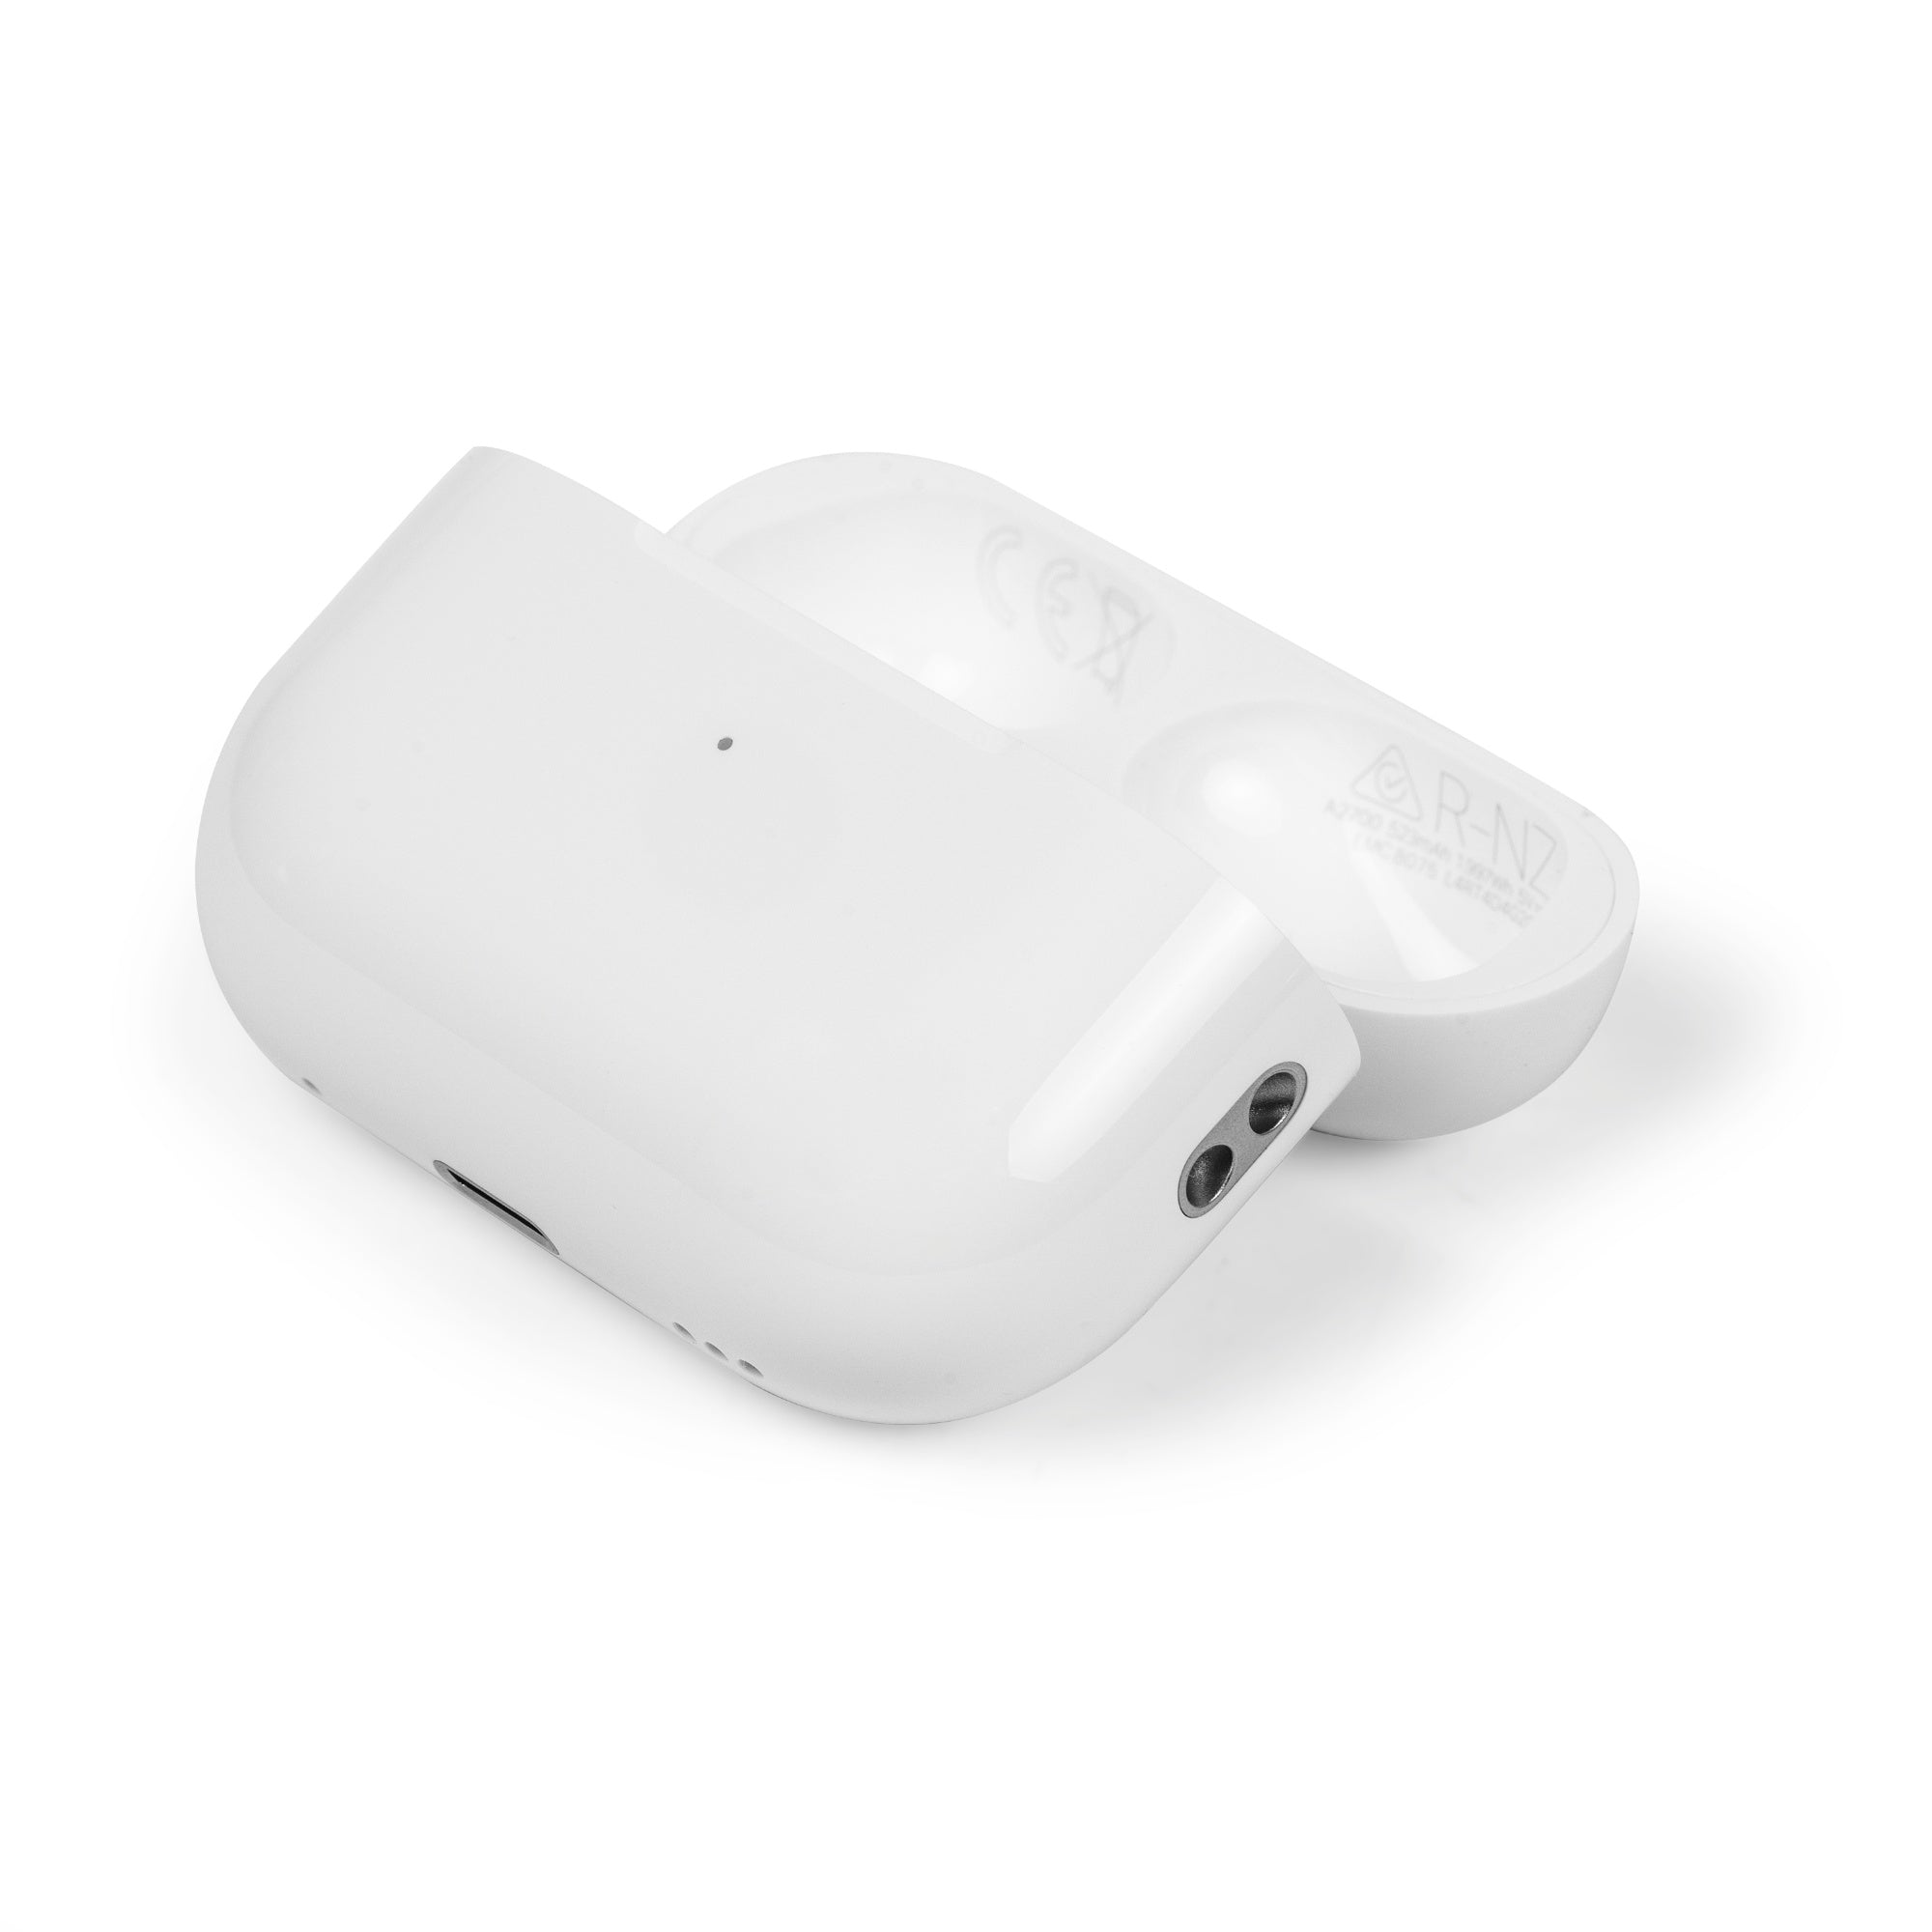 Buy Apple AirPods Pro (2nd generation) refurbished - Revendo